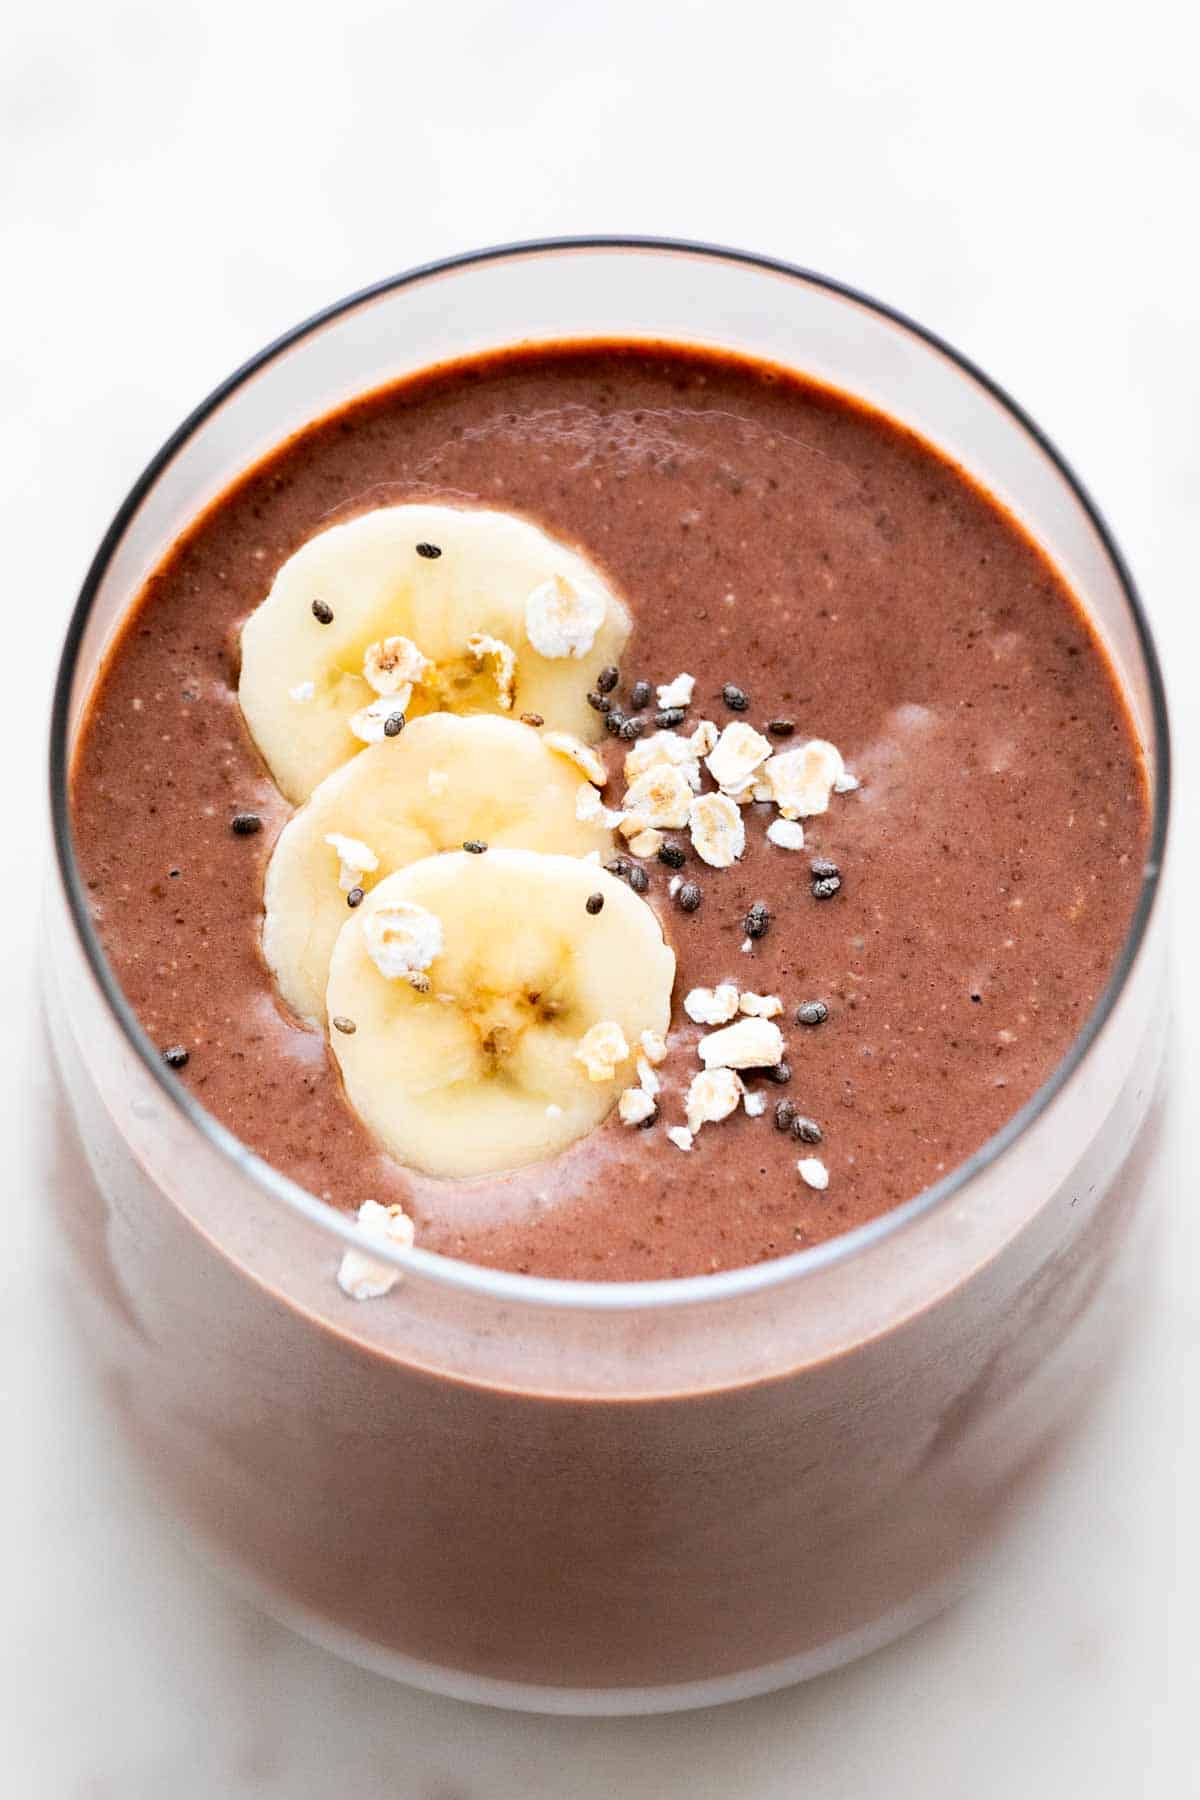 Glass of vegan protein shake garnished with banana, oats, and chia seeds.